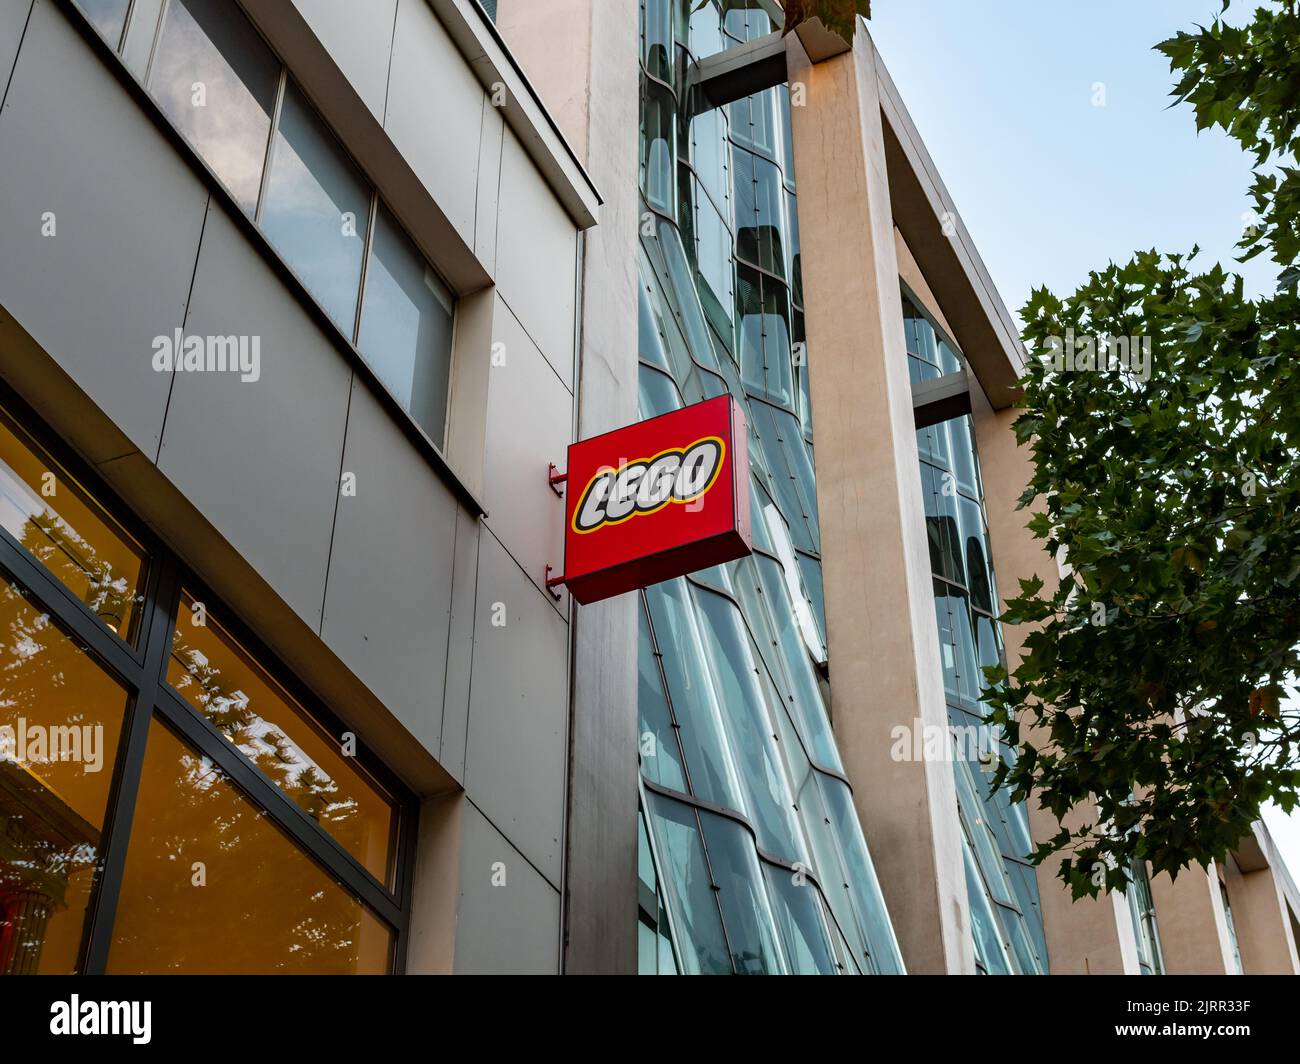 LEGO sign on a building exterior in the city. Logo of the Danish toy manufacturer on a facade. Advertising in a shopping street. Looking up to it. Stock Photo